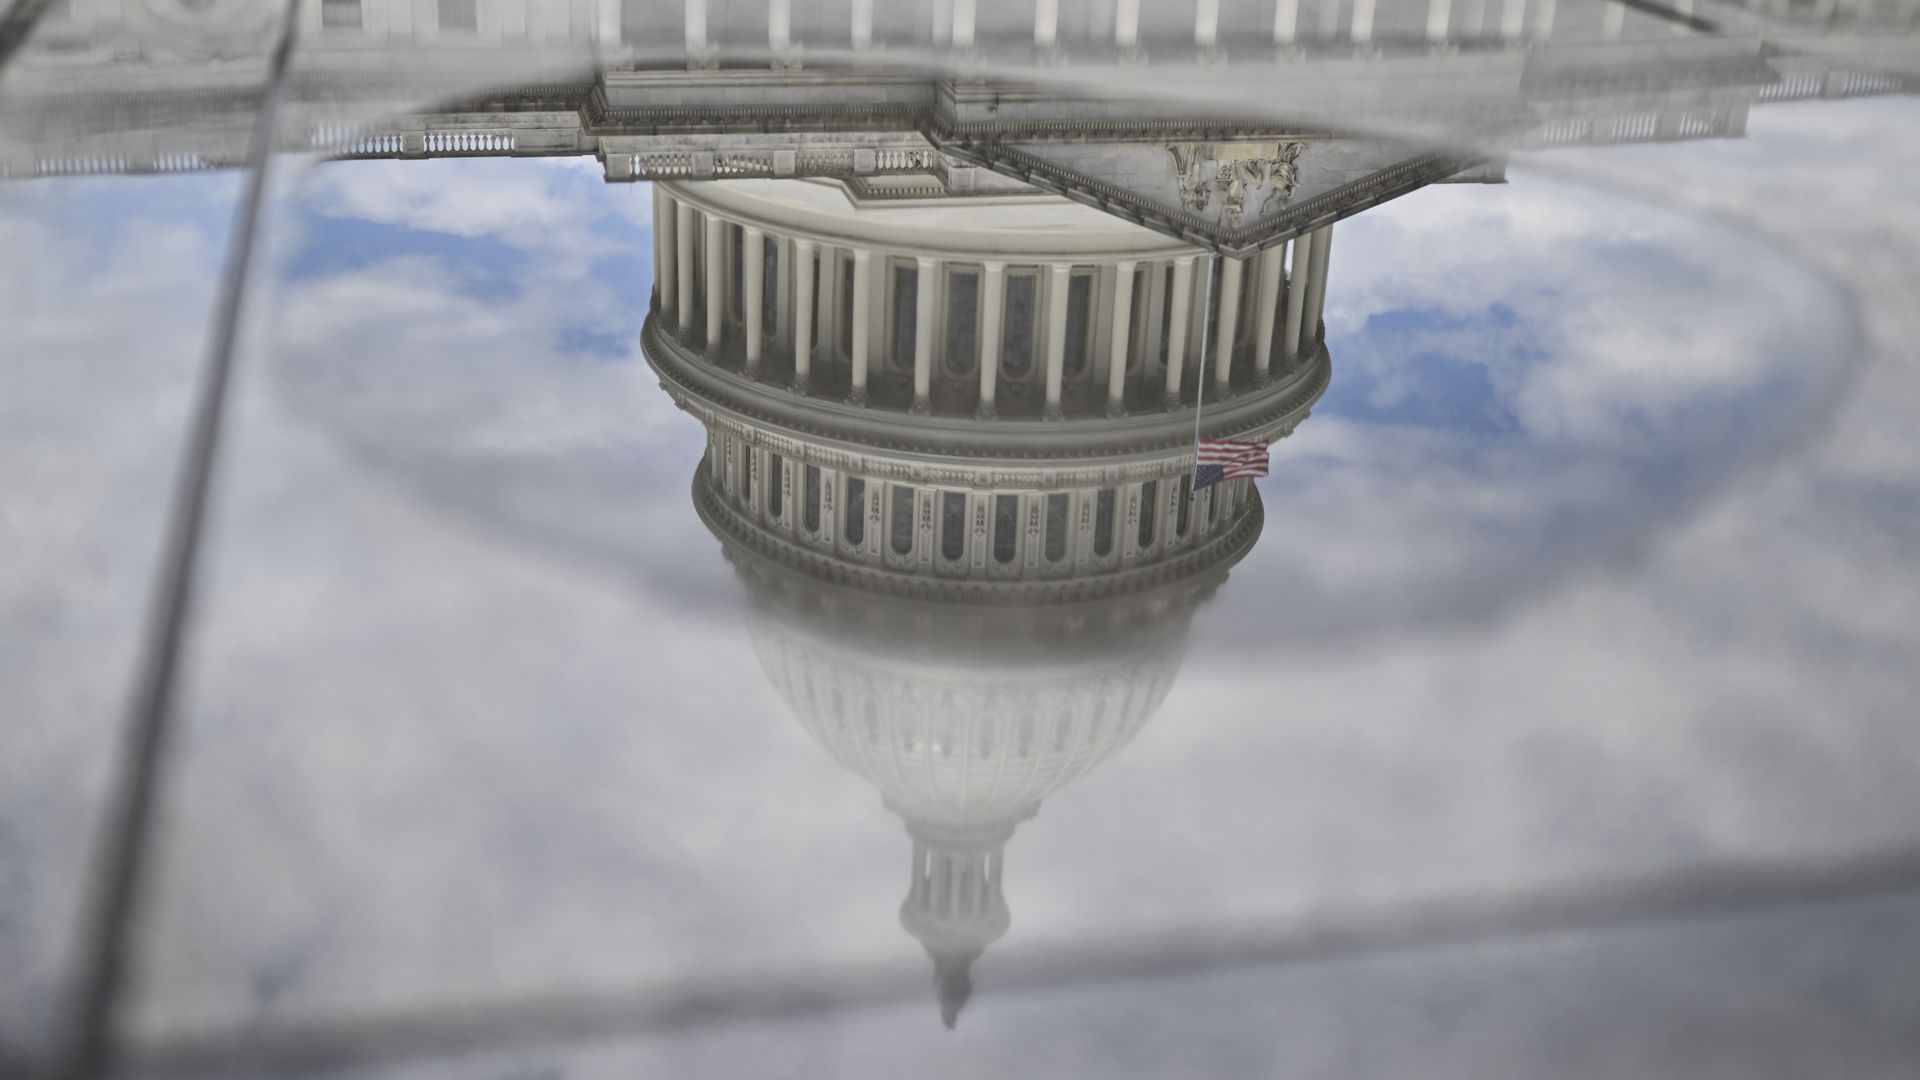 The U.S. Capitol dome pictured upside down in a reflection off a puddle of rainwater